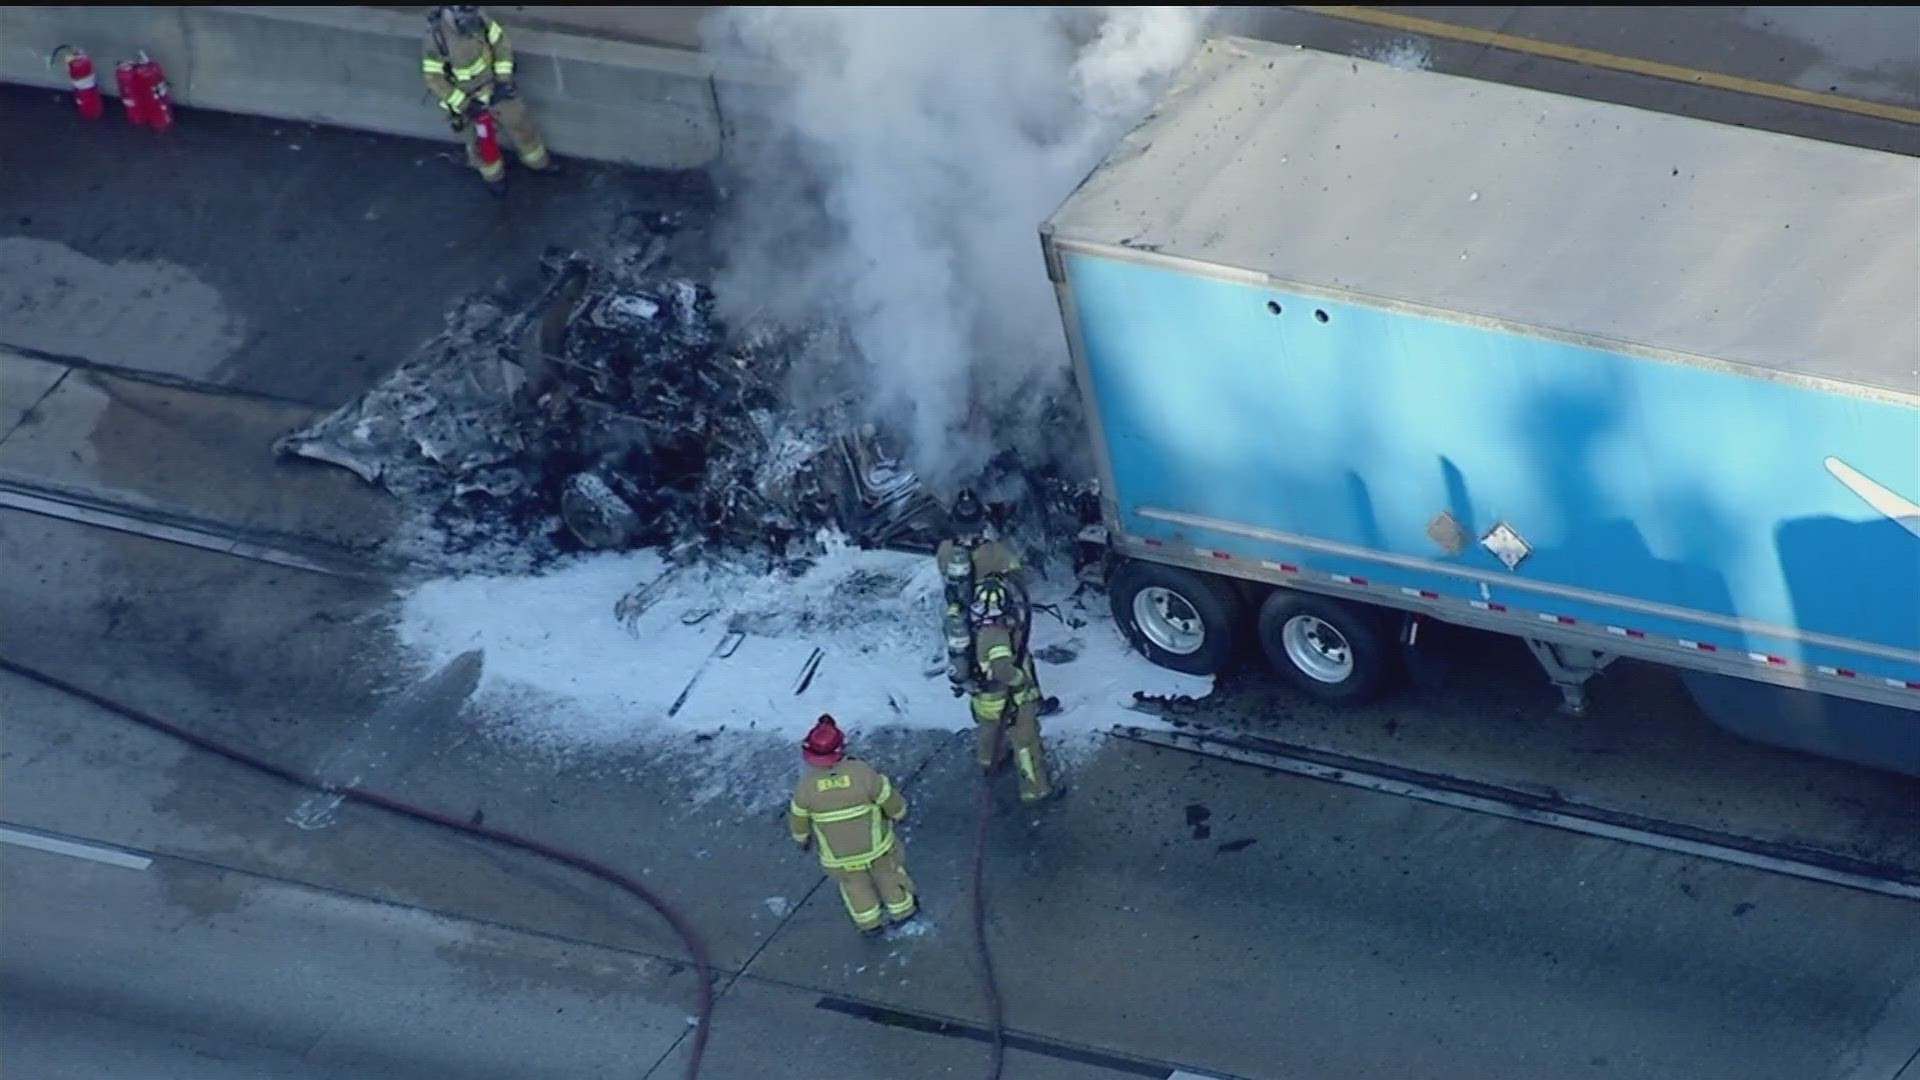 Delays are expected as crews work to put out the flames.